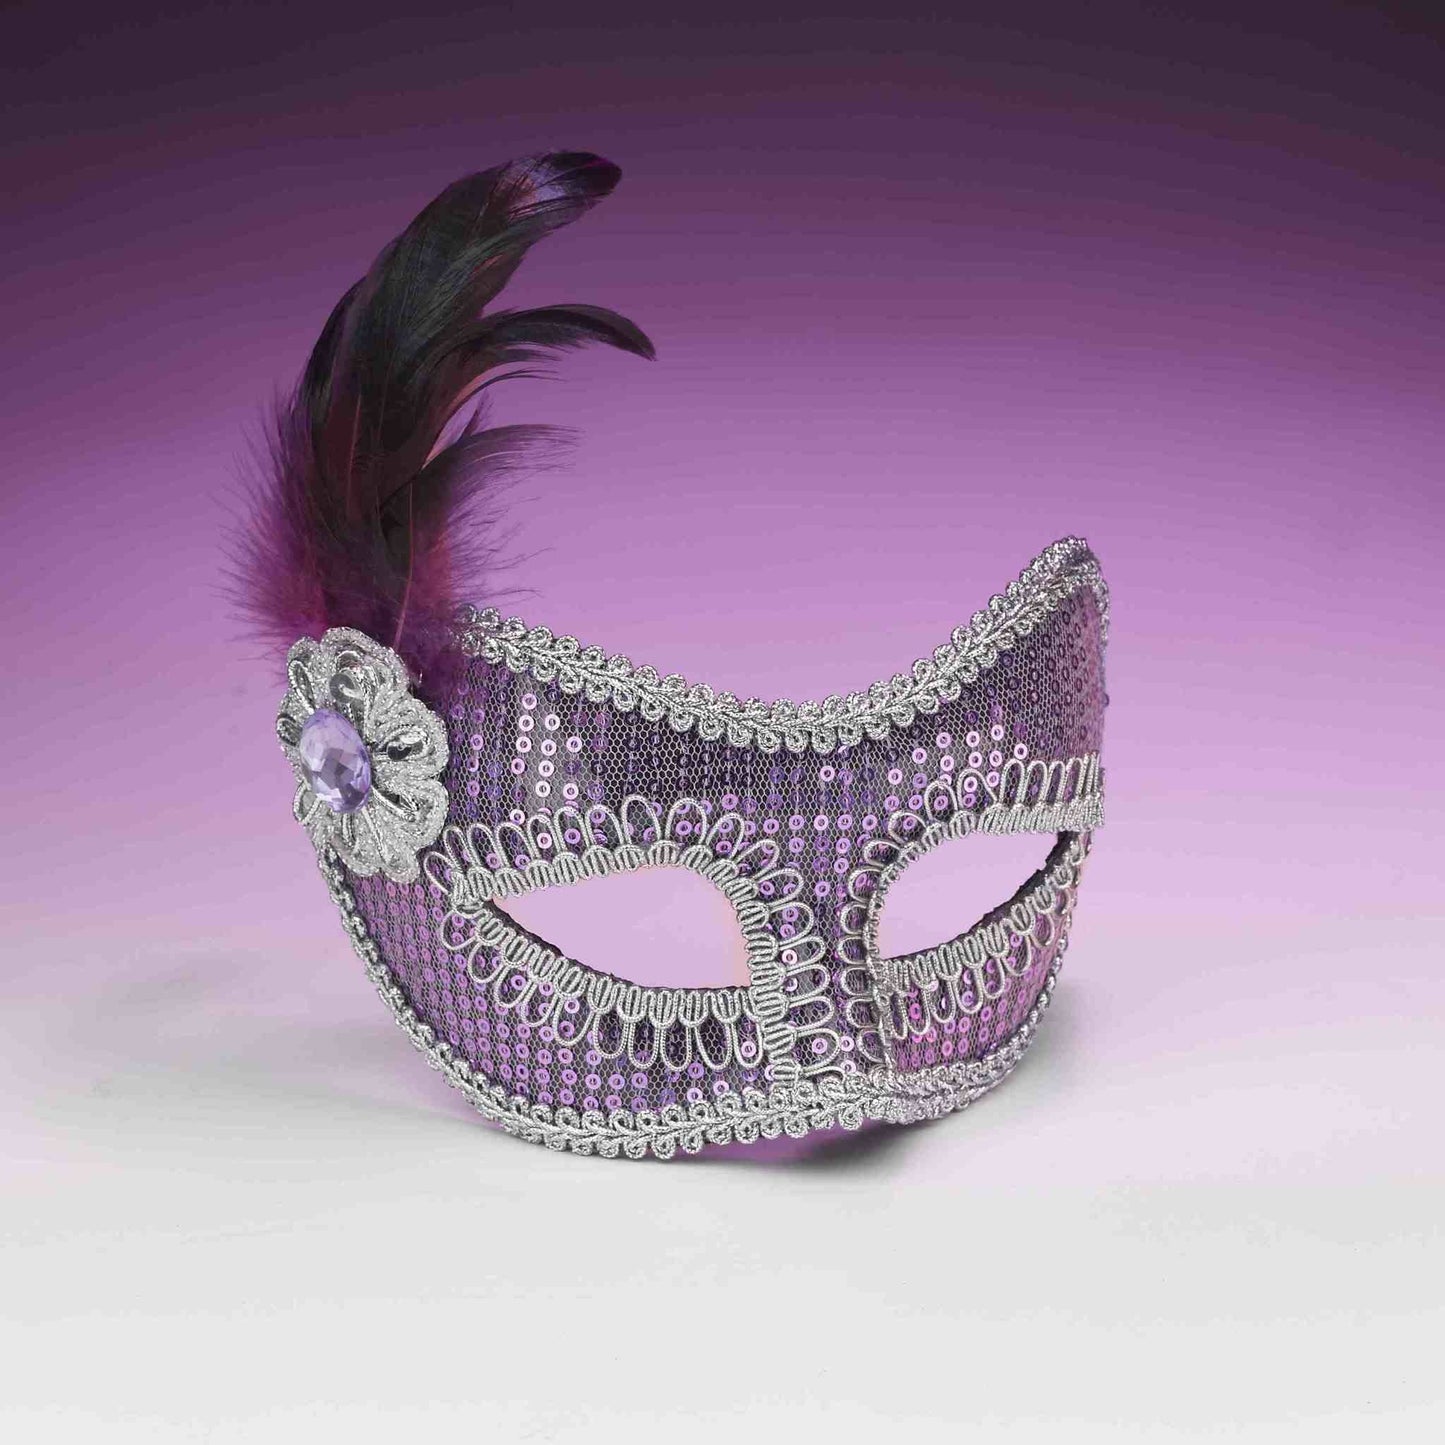 Sequin Fashion Mask - Green